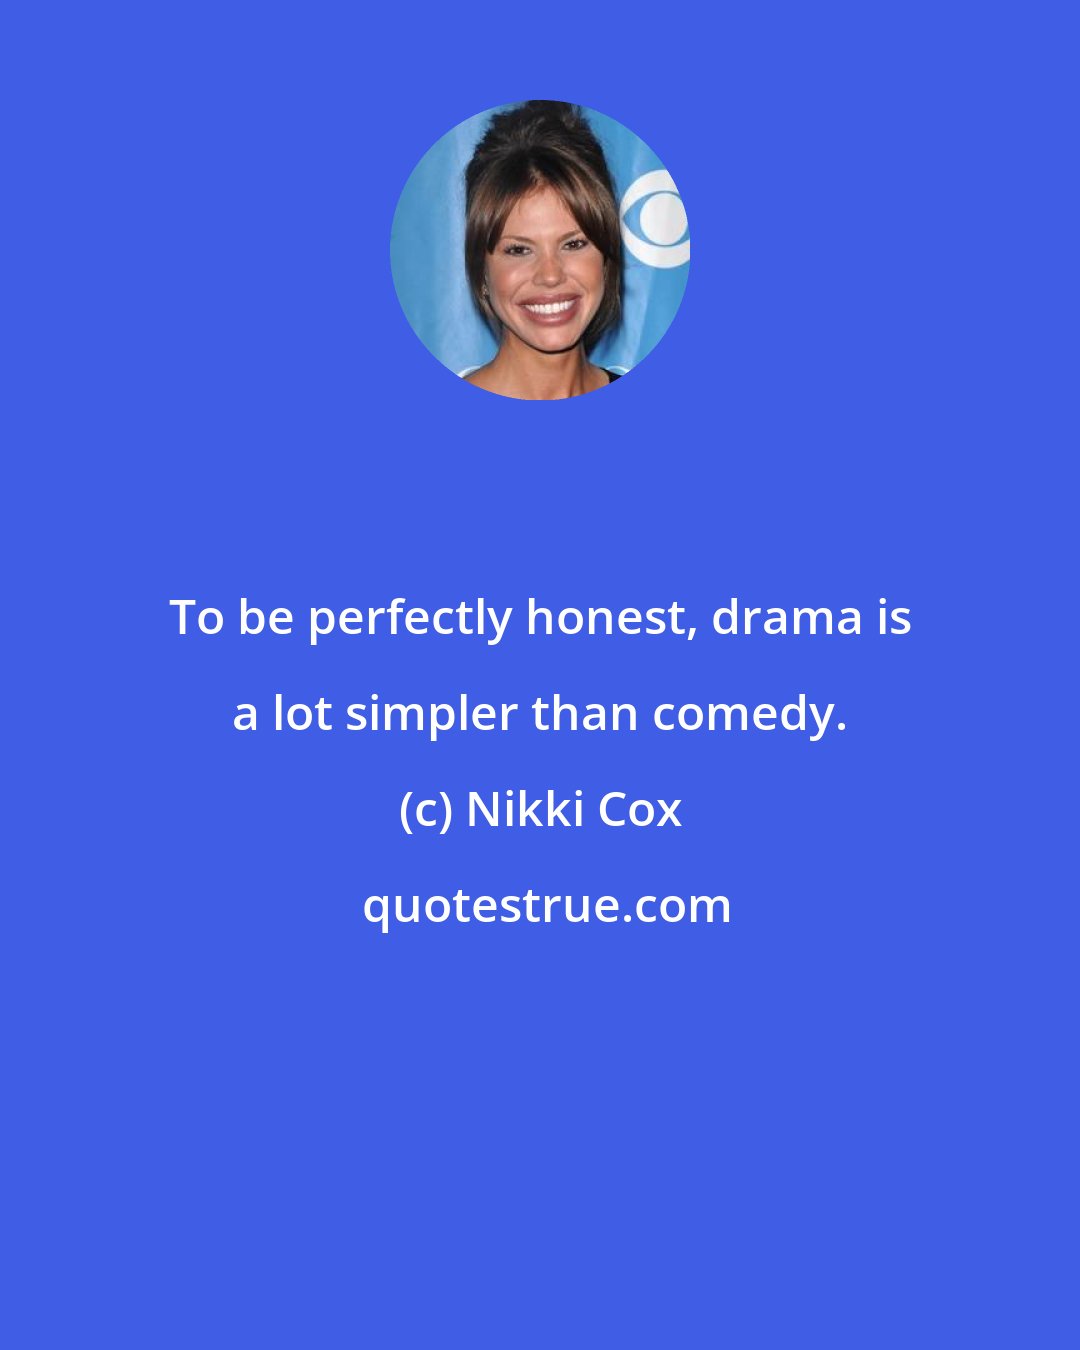 Nikki Cox: To be perfectly honest, drama is a lot simpler than comedy.